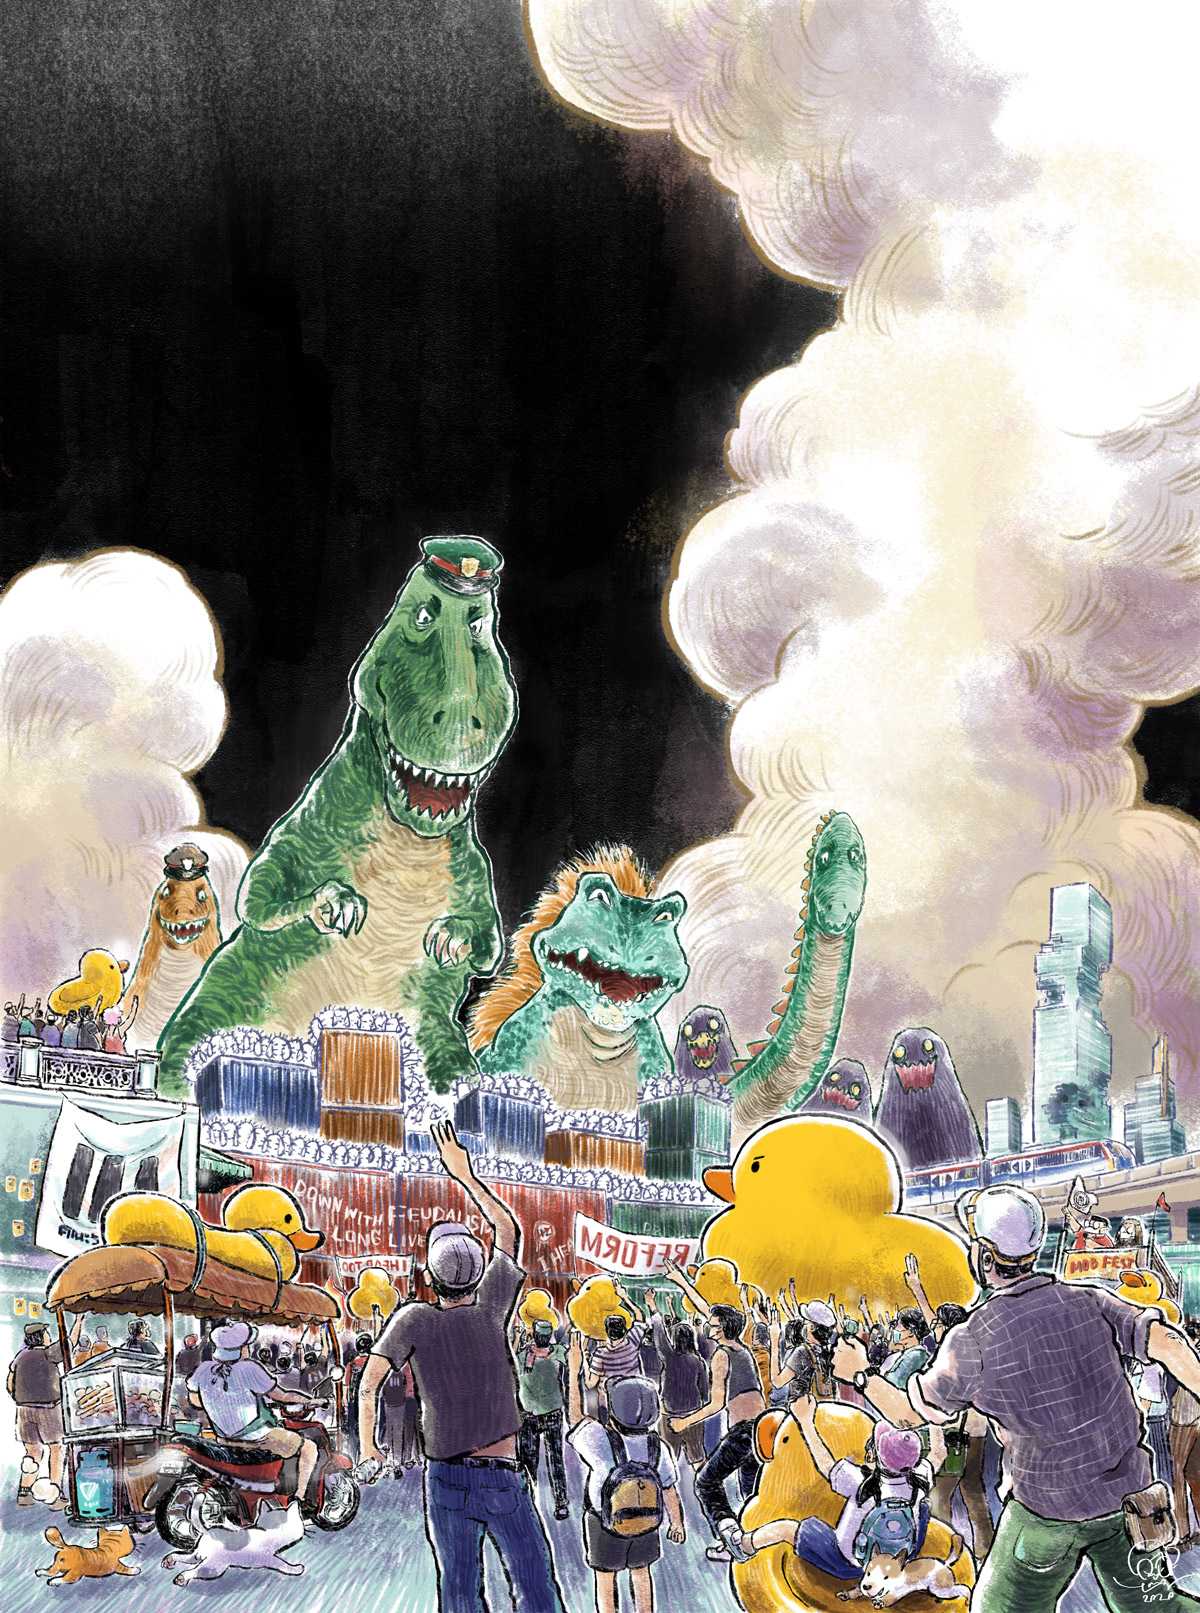 A crowd of protestors gathers outdoors, bearing giant yellow ducks. They raise three-fingered salutes against the towering dinosaurs that threaten to rampage their city.